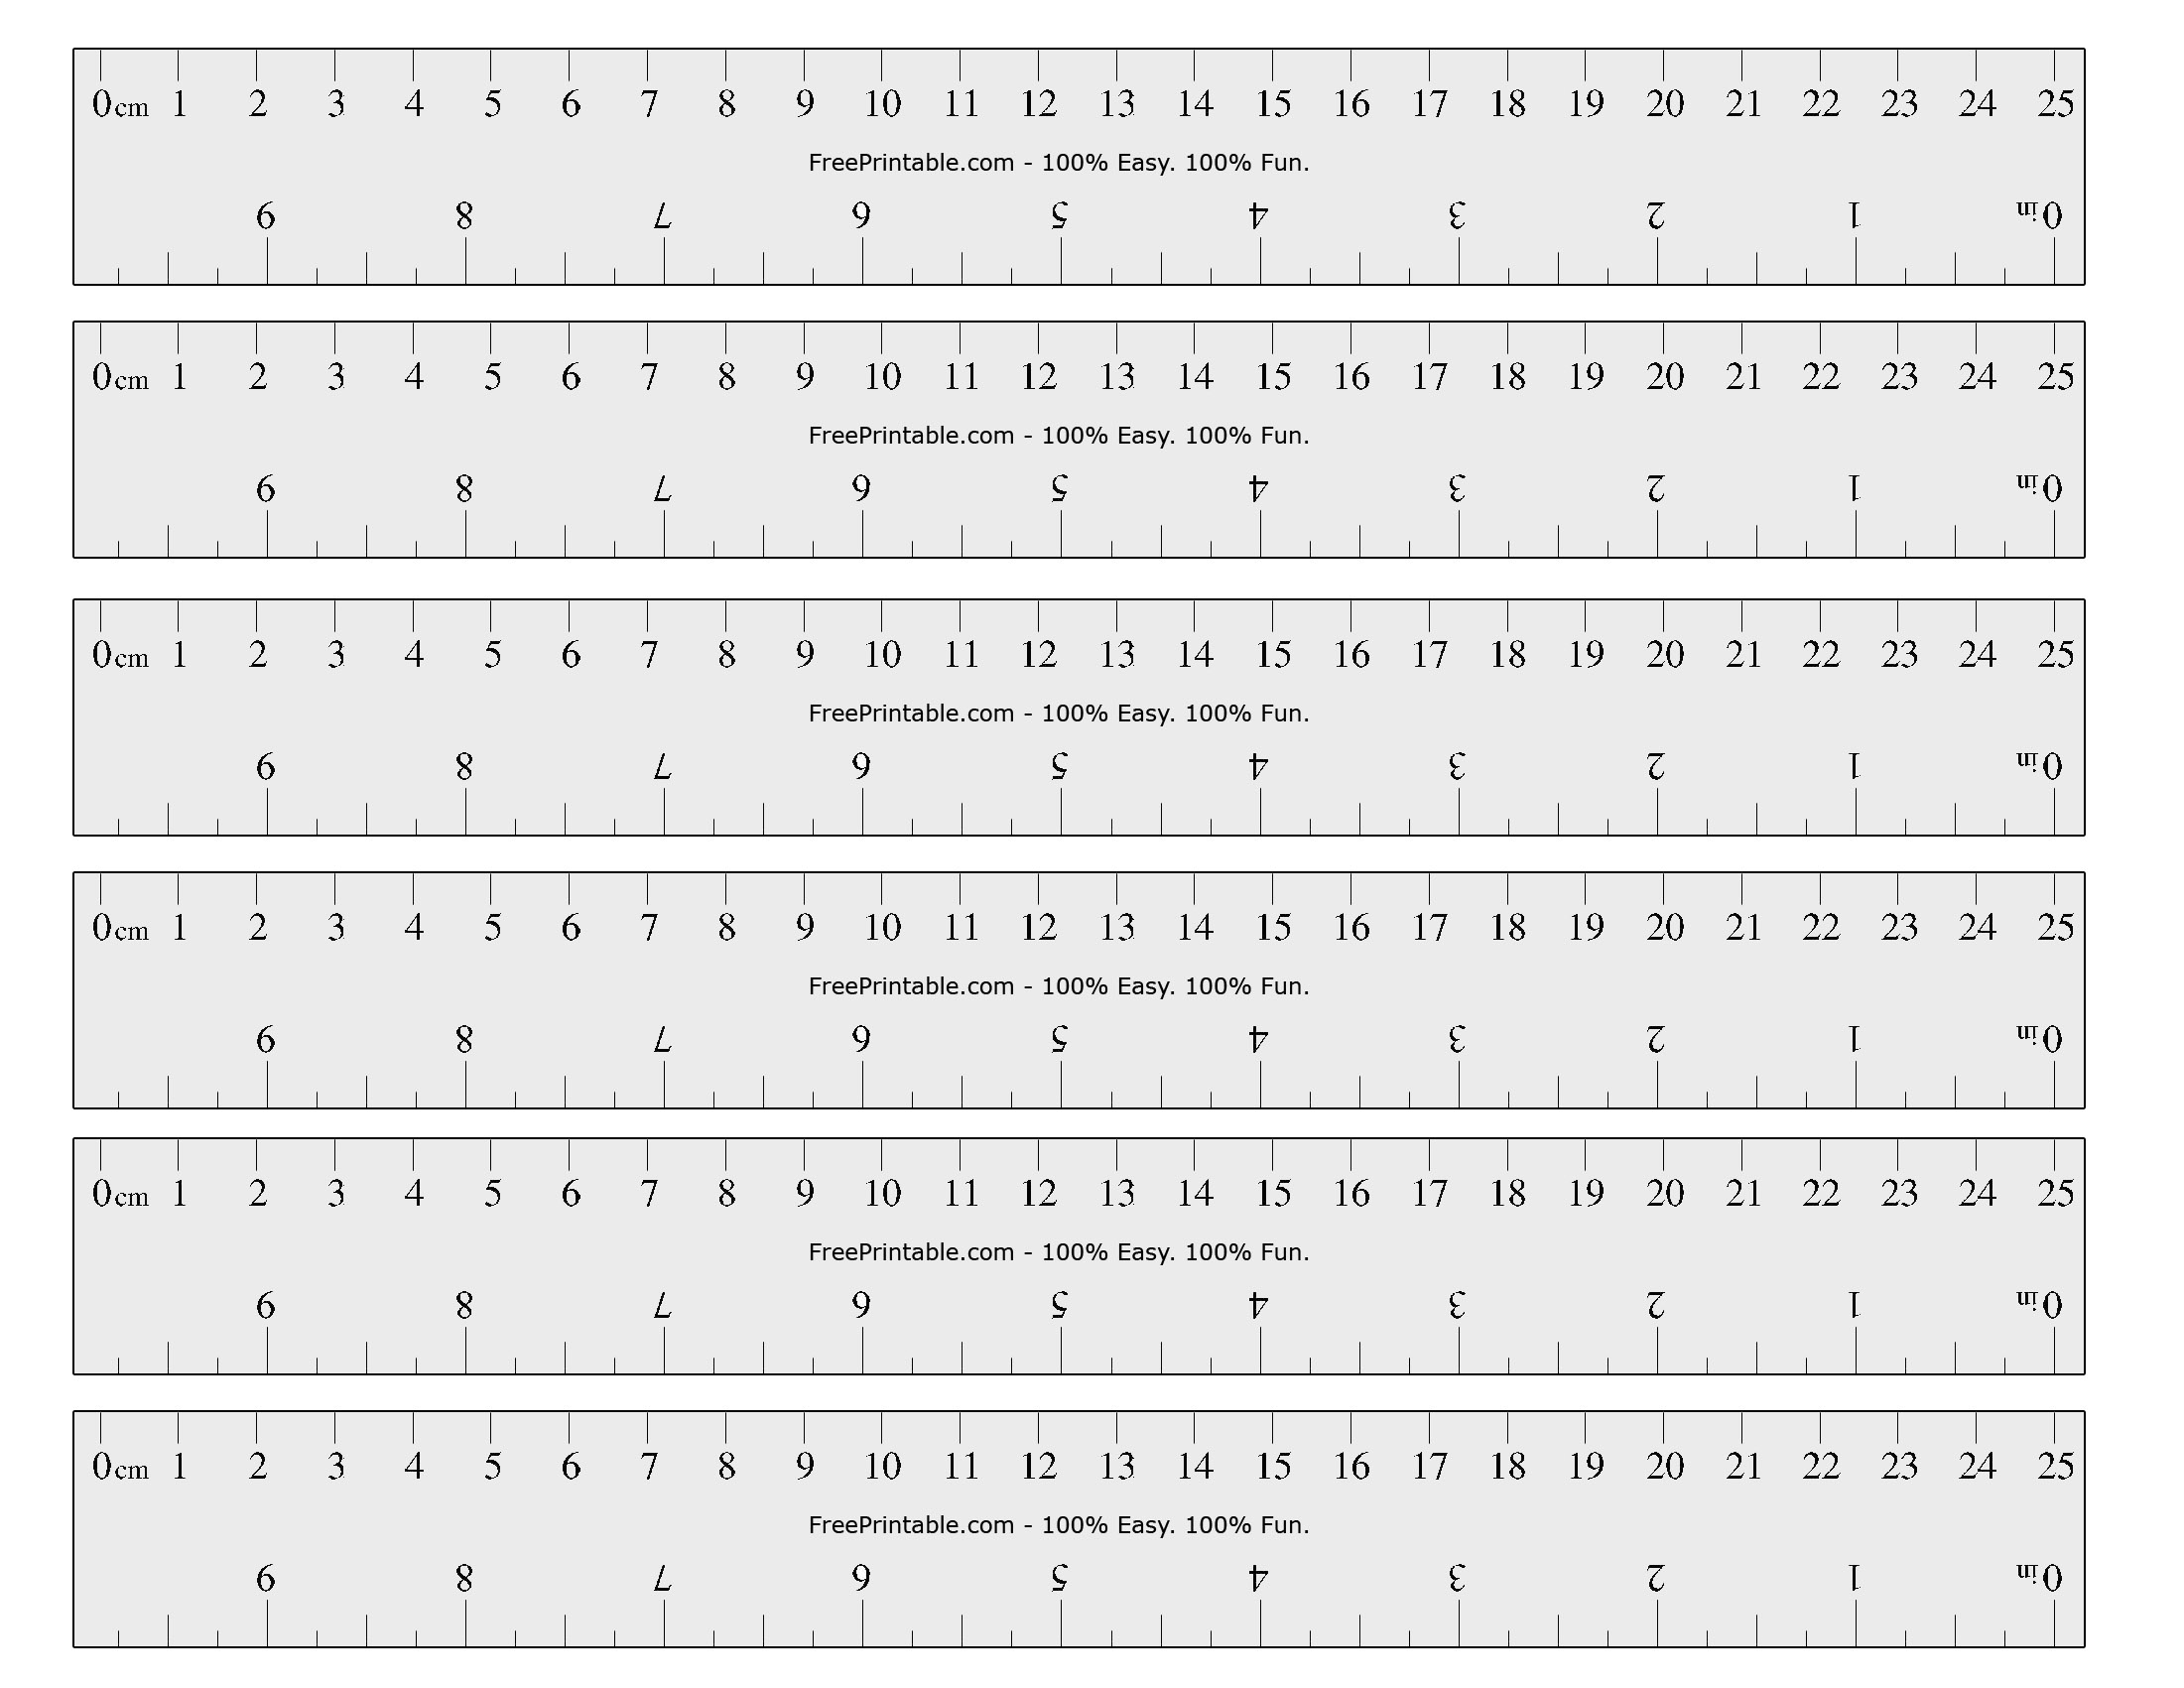 Free Printable Ho Scale Ruler Printable Ruler Actual Size